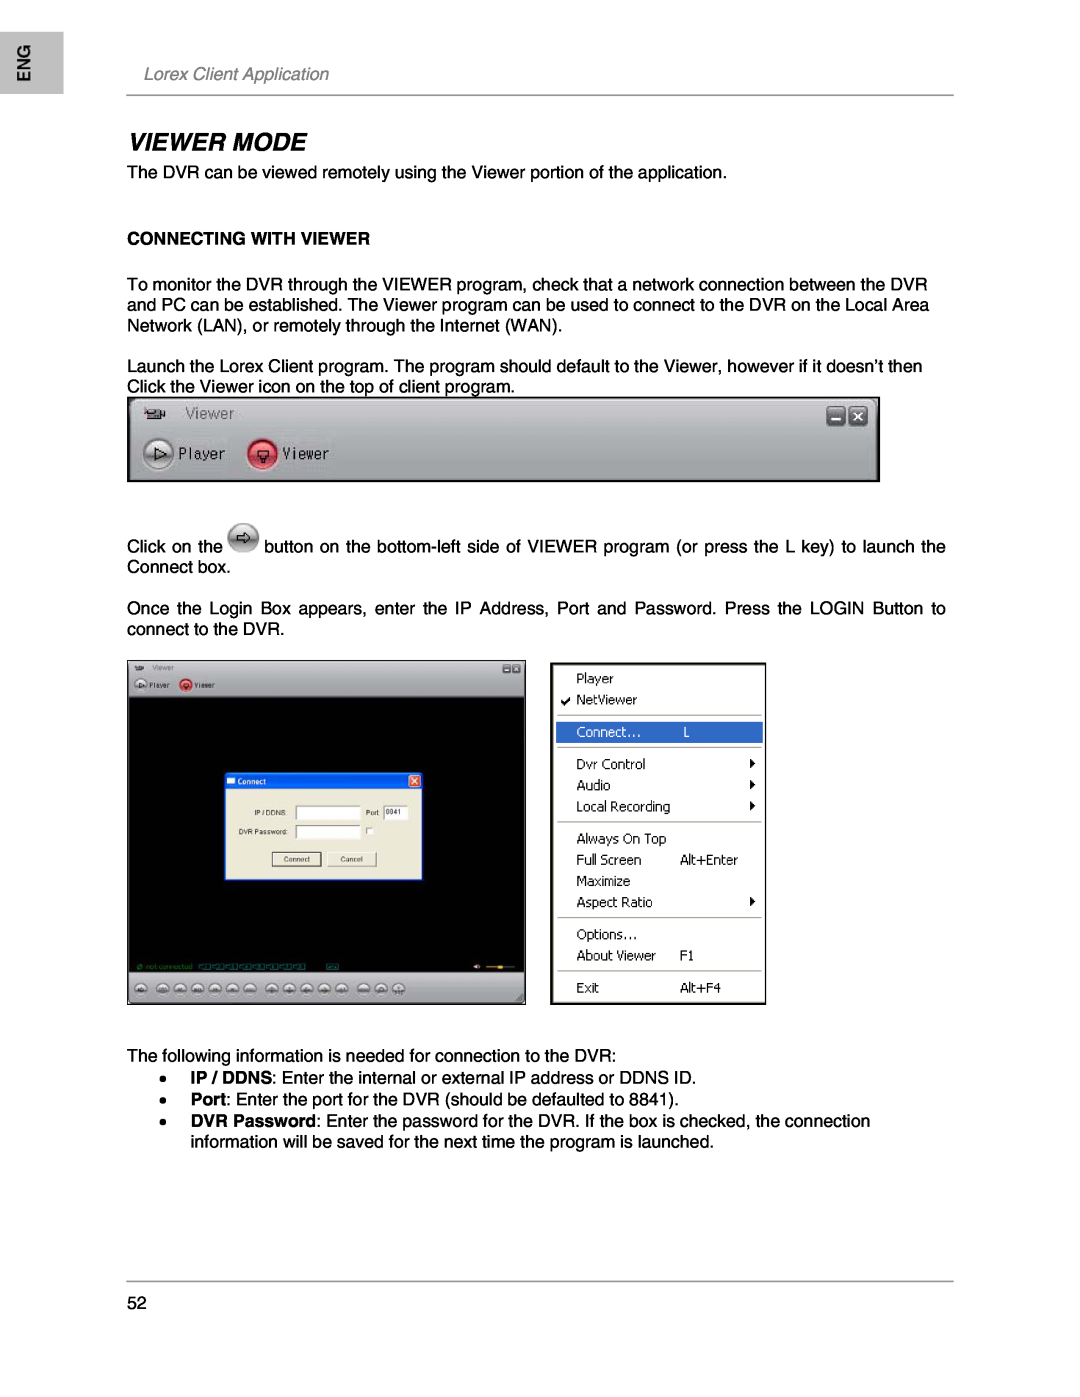 LOREX Technology L208, L204 instruction manual Viewer Mode, Lorex Client Application, Connecting With Viewer 